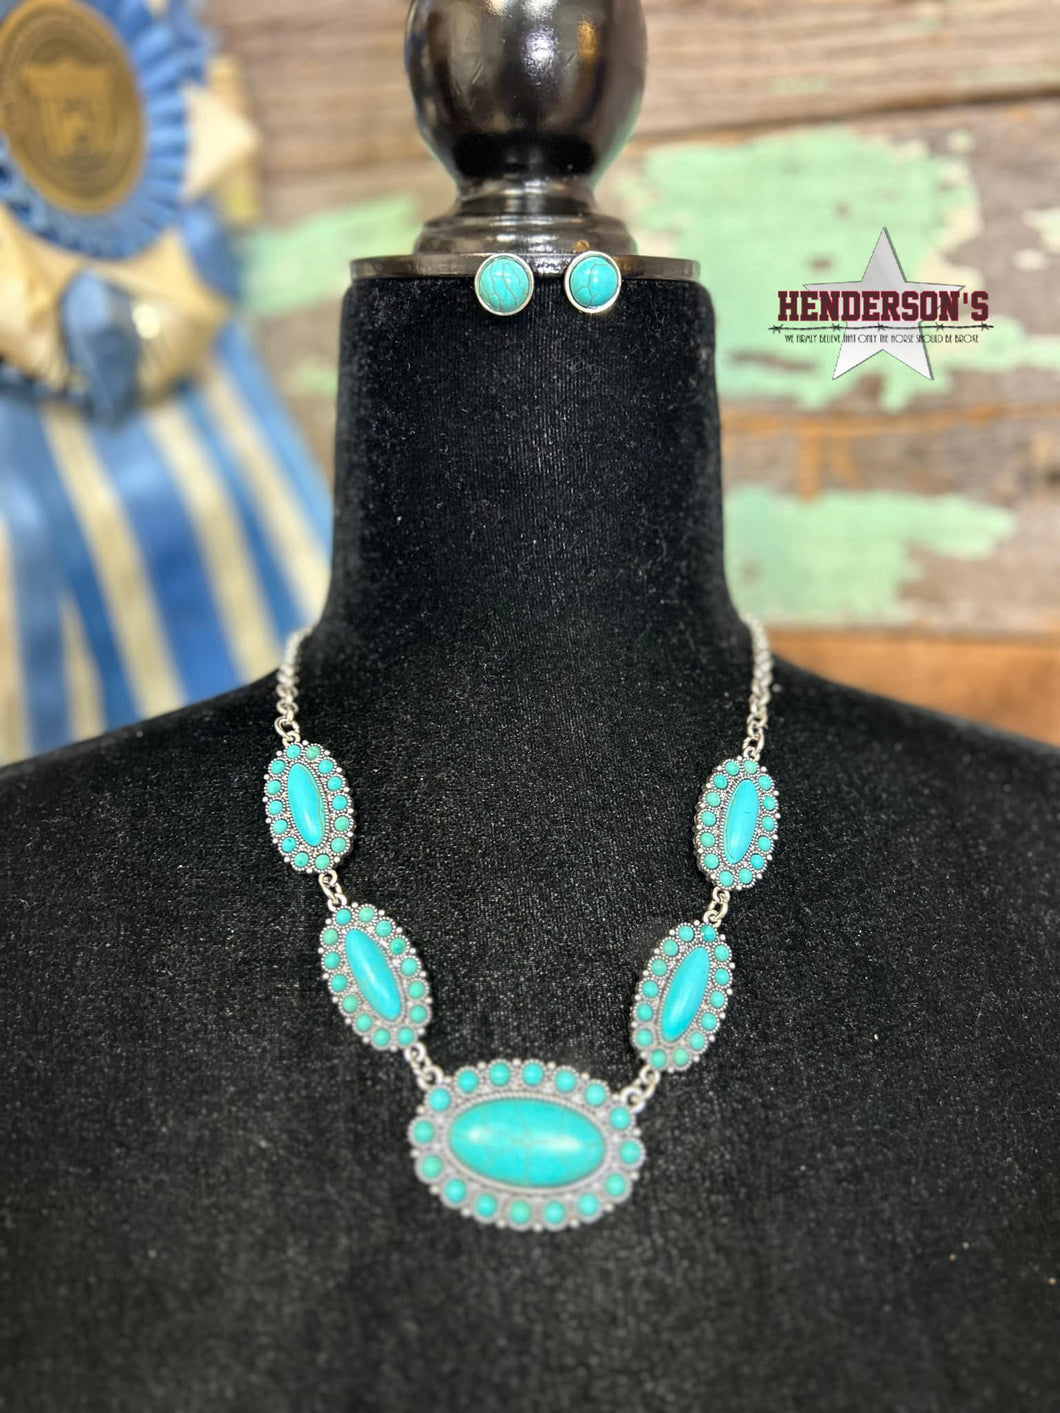 Western Turquoise Concho Necklace Set - Henderson's Western Store